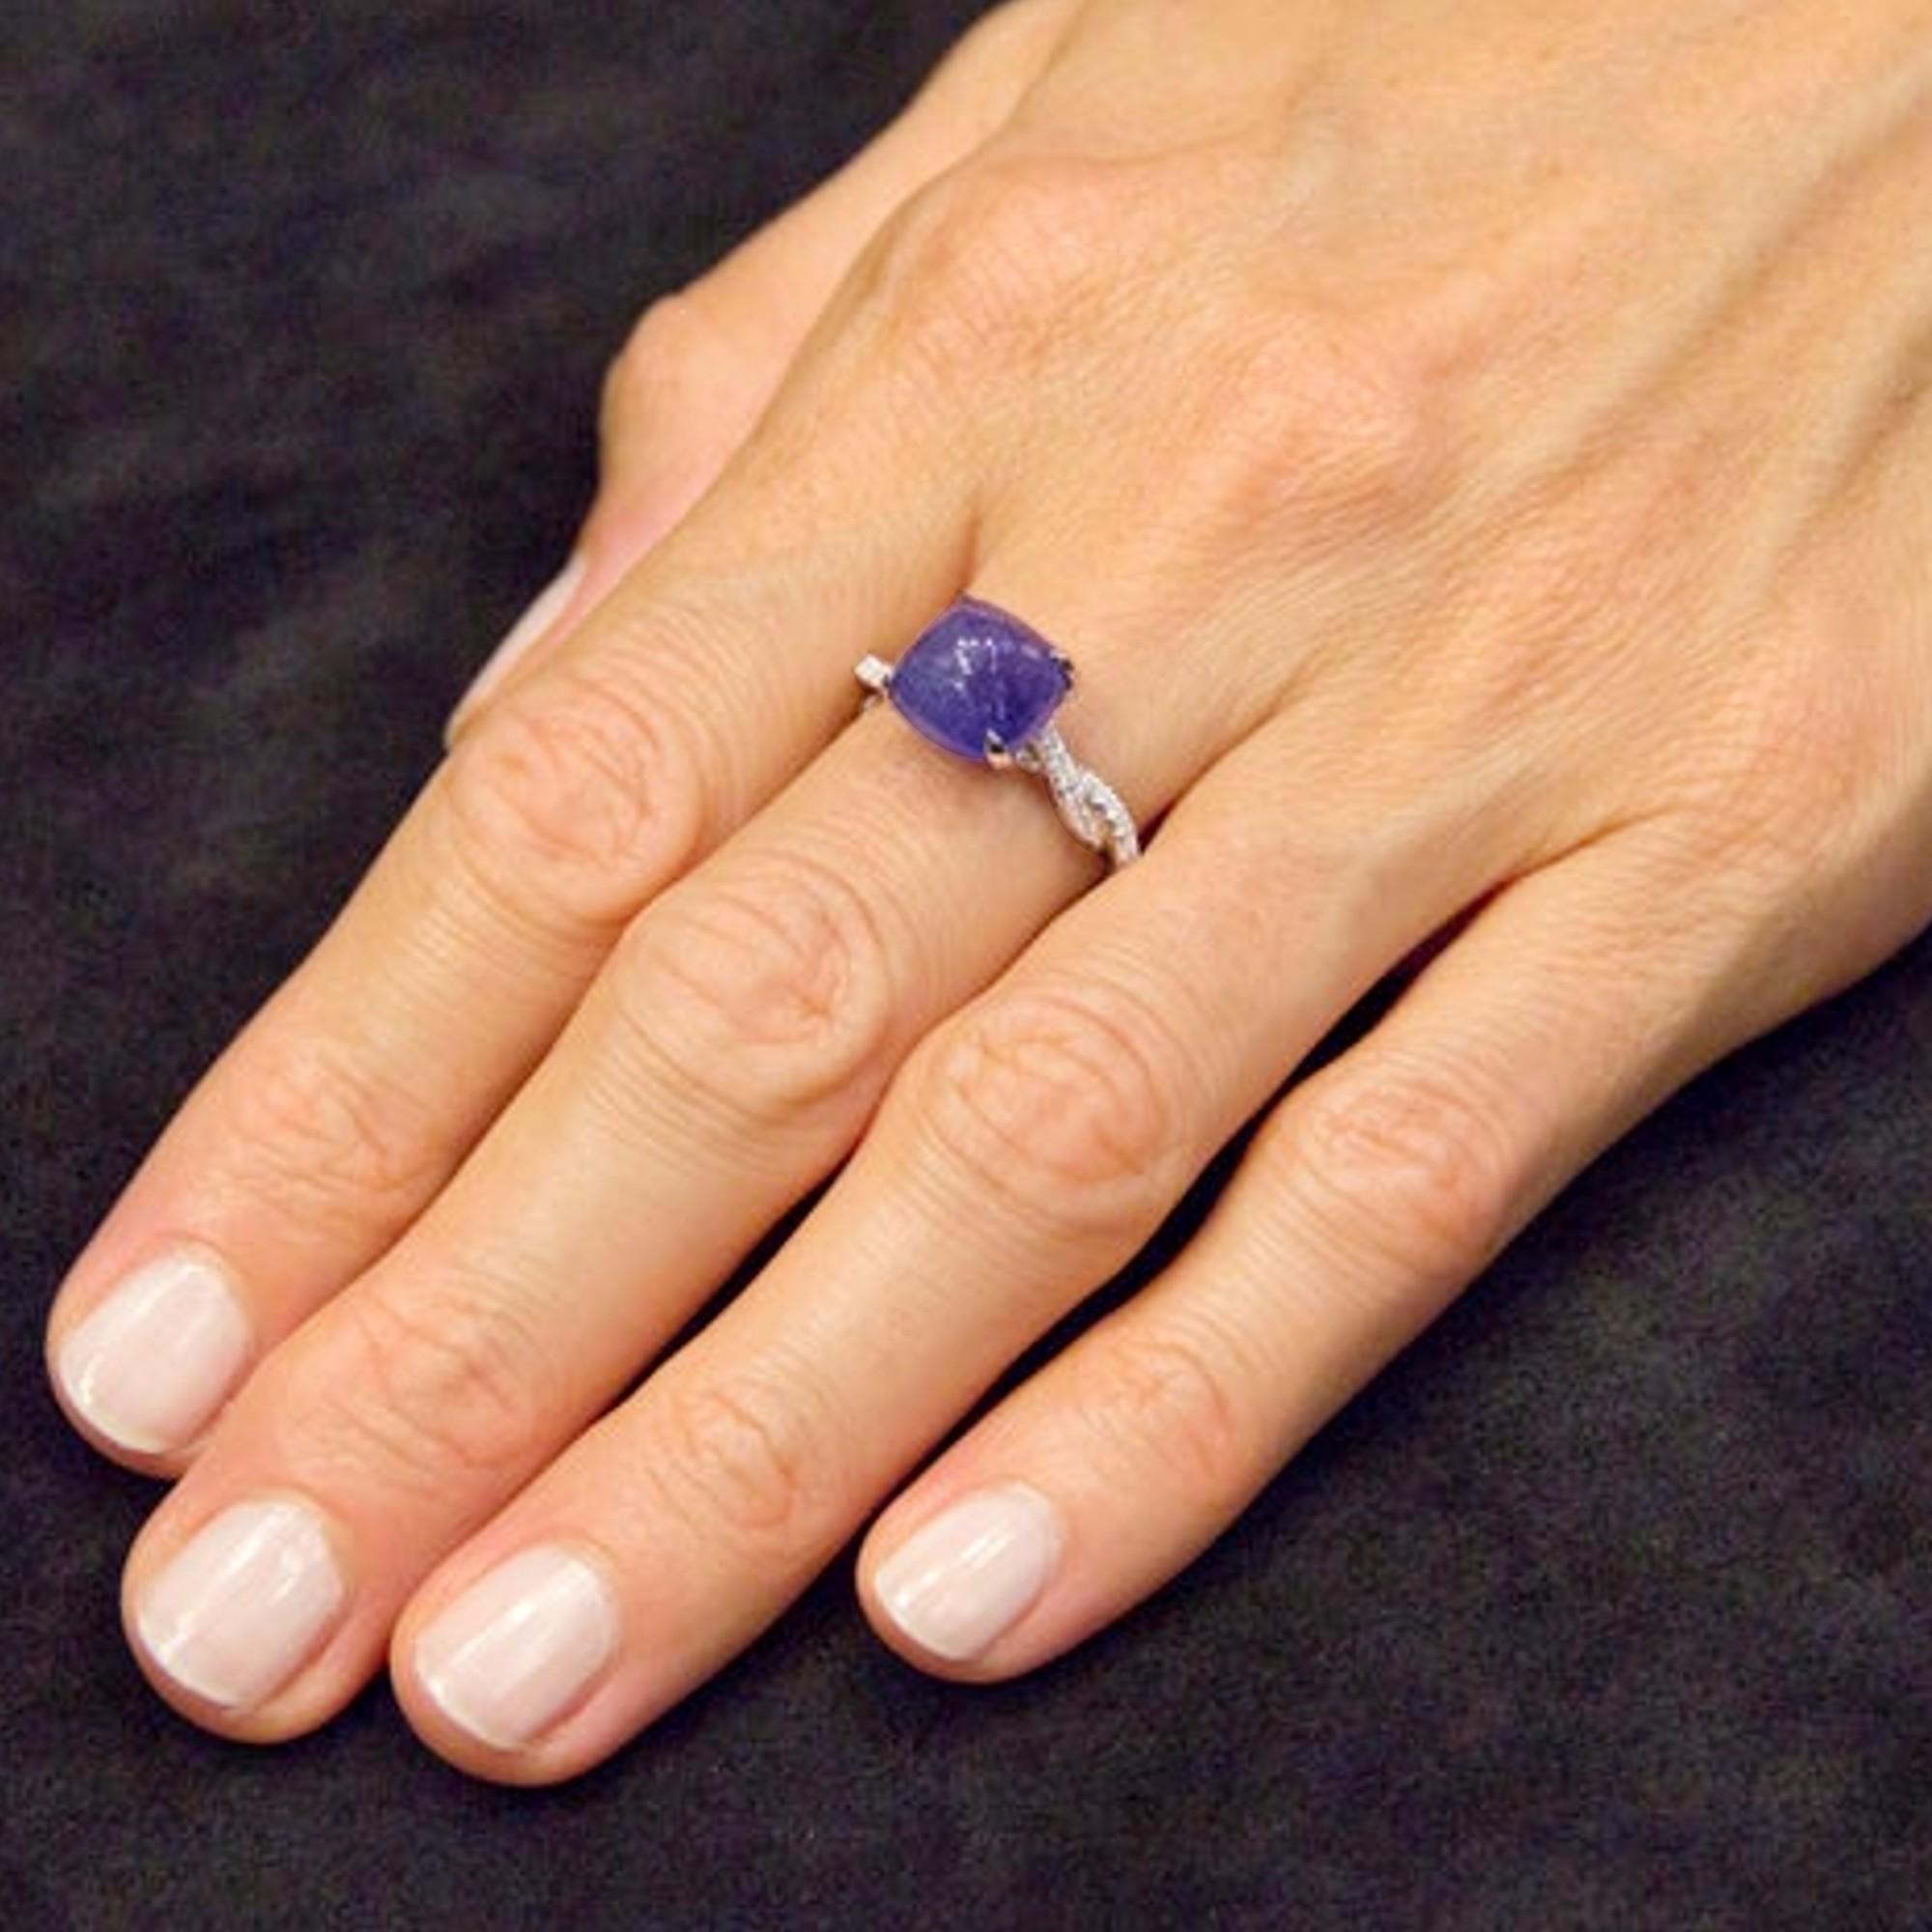 Alex Jona design collection, hand crafted in Italy, 18 karat white gold ring centering a cabochon Tanzanite weighing 6.32 carats. The shoulders are set with 84 White diamonds weighing 0.40 carats in total, F color, VVS1 clarity.
Dimensions: 1.18 in.